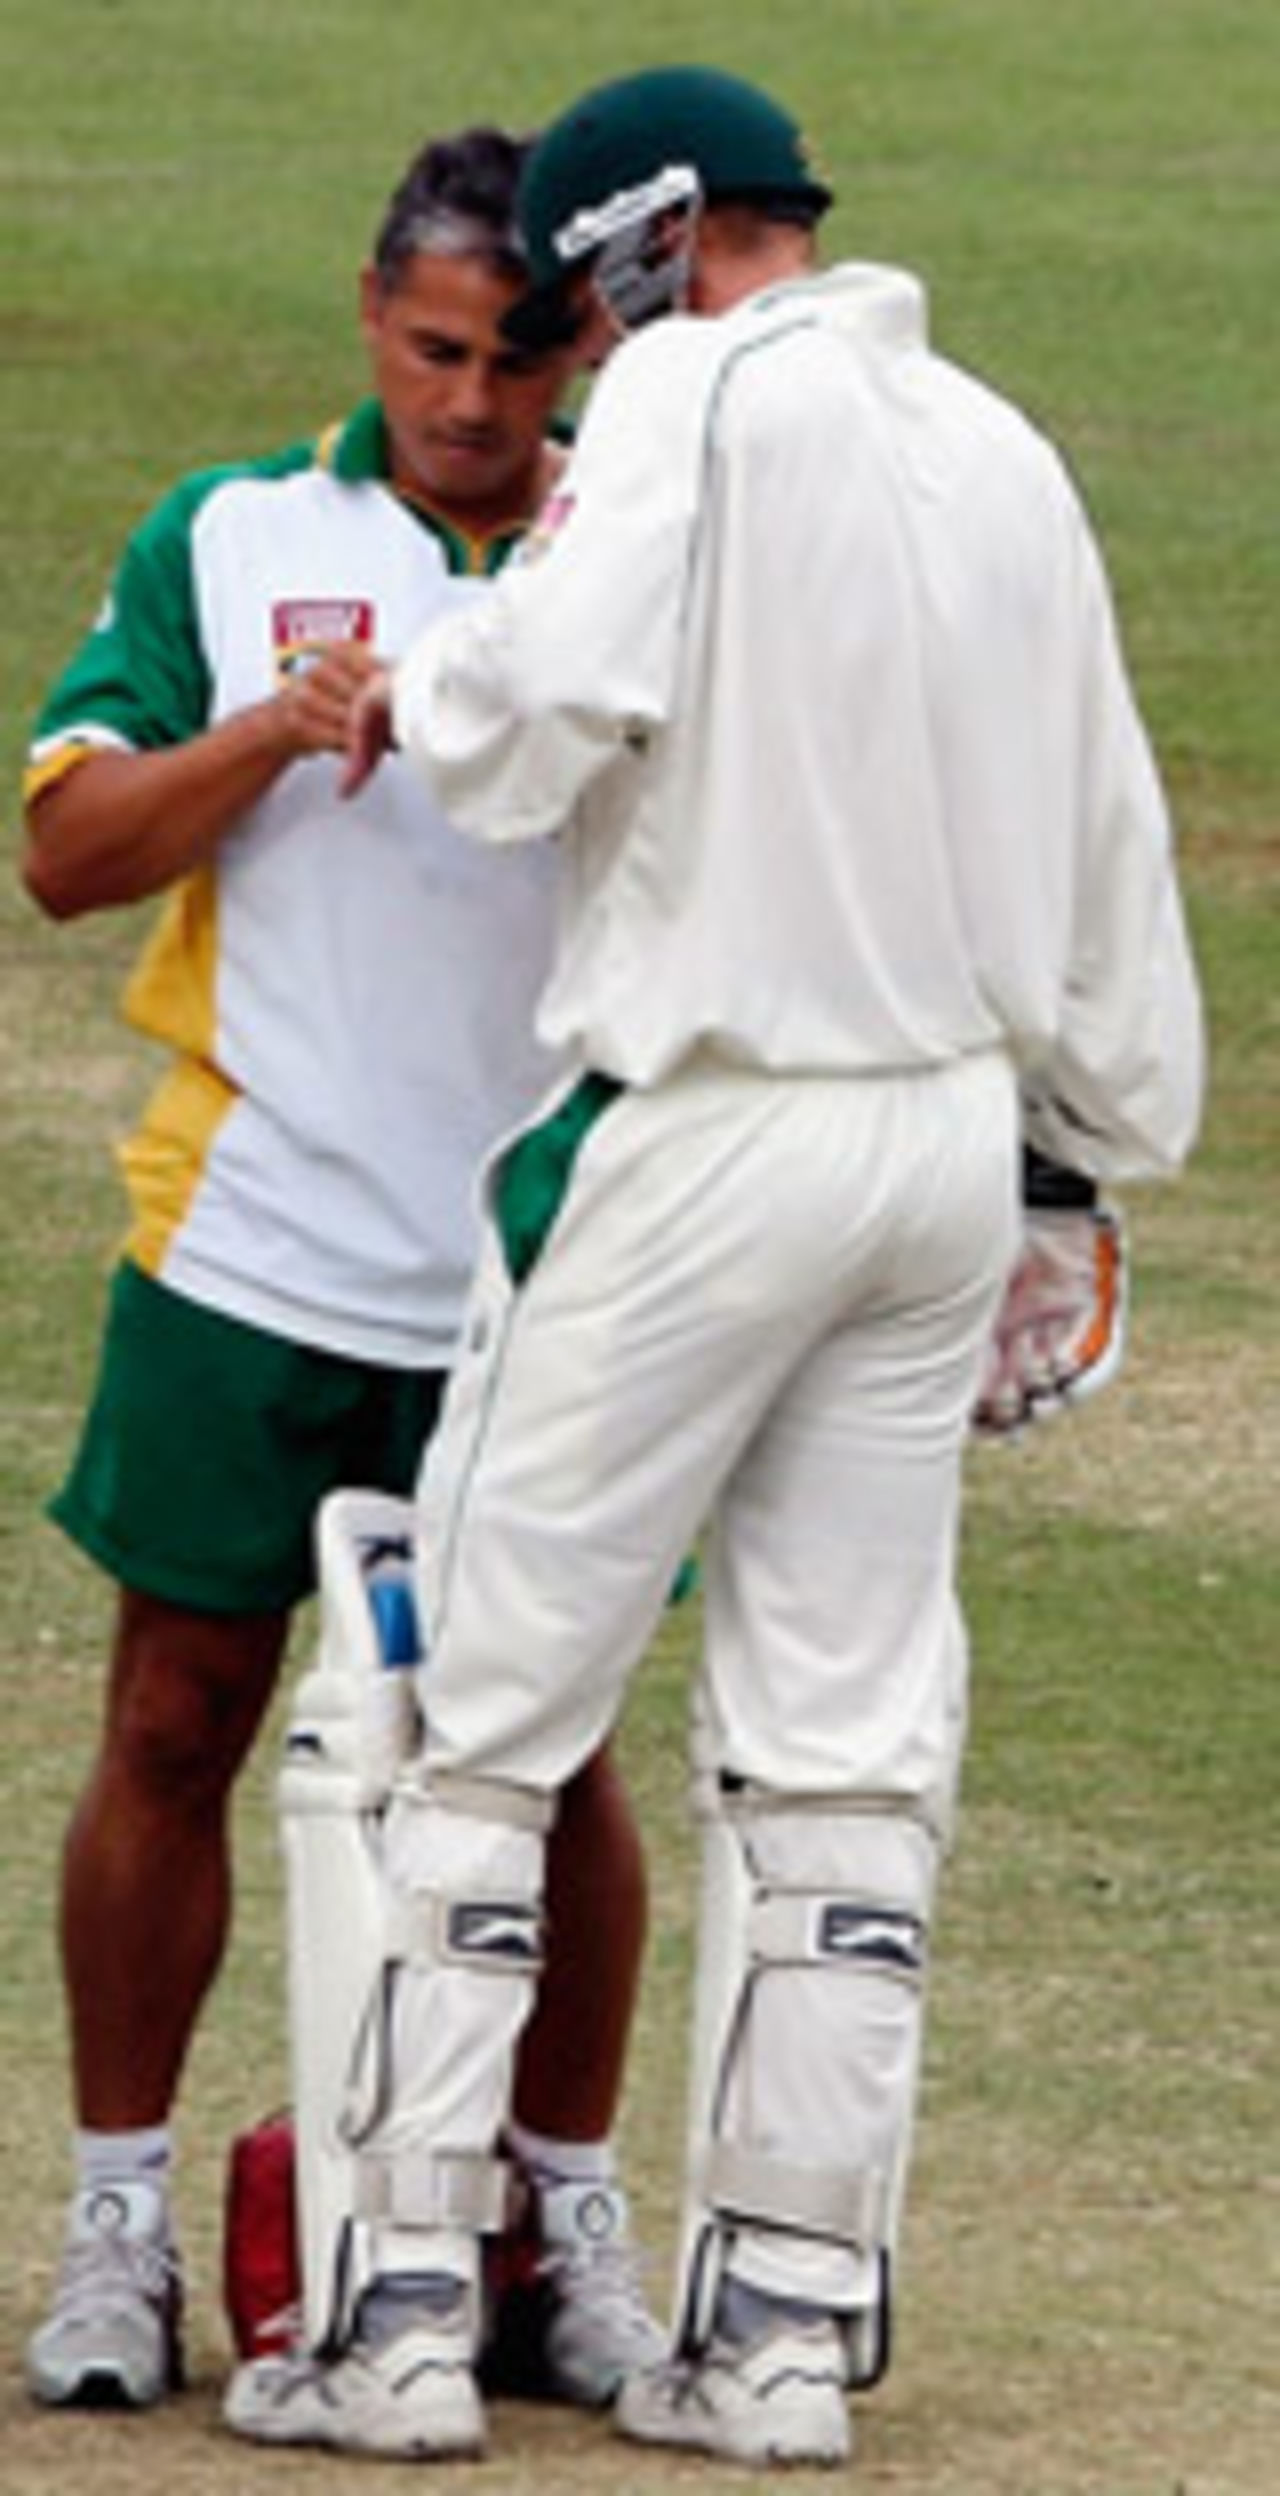 Shaun Pollock receiving treatment for his fingers, South Africa v England, 2nd Test, Durban, 5th day, December 30 2004